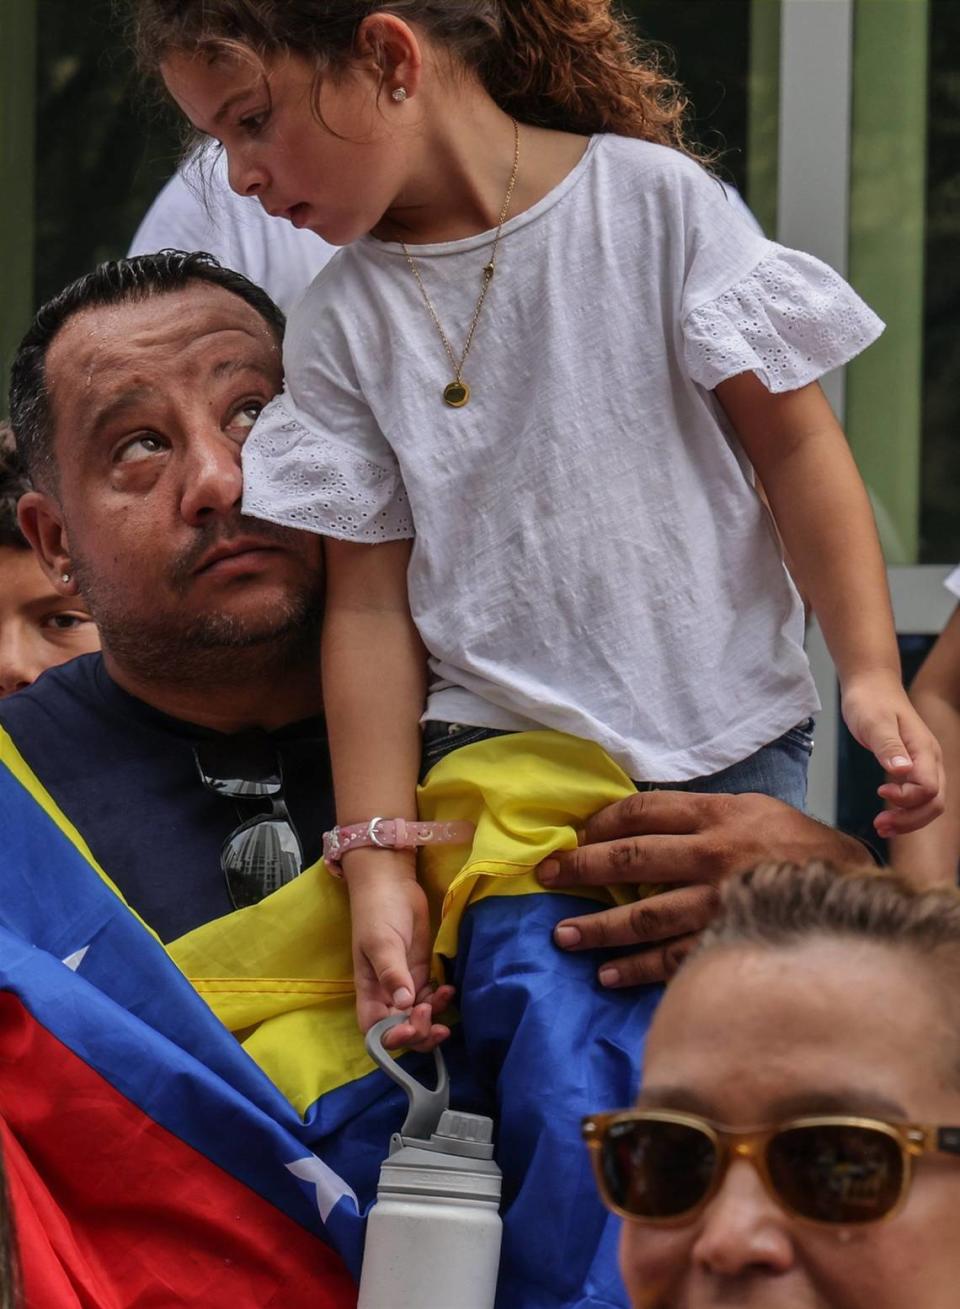 Davie resident Victor Macedo, 39, left, looks towards his daughter Sonia, 5, perched on his shoulder after the signing of the Venezuelan National Anthem during the demonstration for the right to vote in the Venezuelan election. A group of about sixty people gathered at the former Venezuelan consulate in protest of their voting denial in the Venezuelan election on Sunday, July 28, 2024, in Miami, Florida.